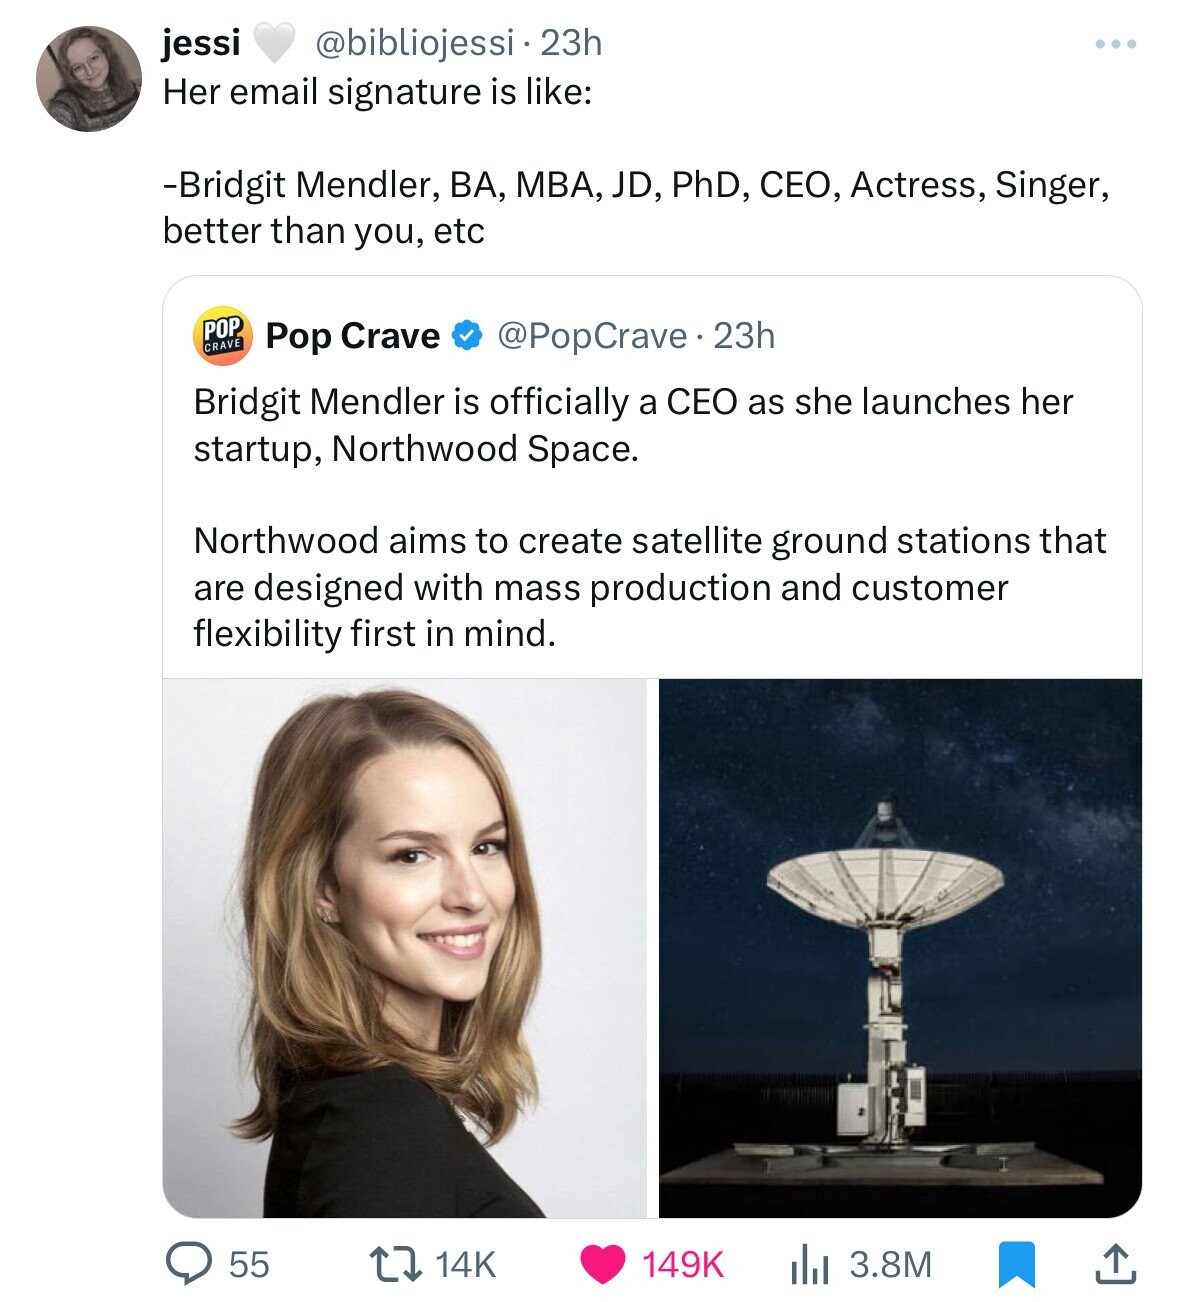 media - jessi 23h Her email signature is Bridgit Mendler, Ba, Mba, Jd, PhD, Ceo, Actress, Singer, better than you, etc Pop Pop Crave . 23h Bridgit Mendler is officially a Ceo as she launches her startup, Northwood Space. Northwood aims to create satellite